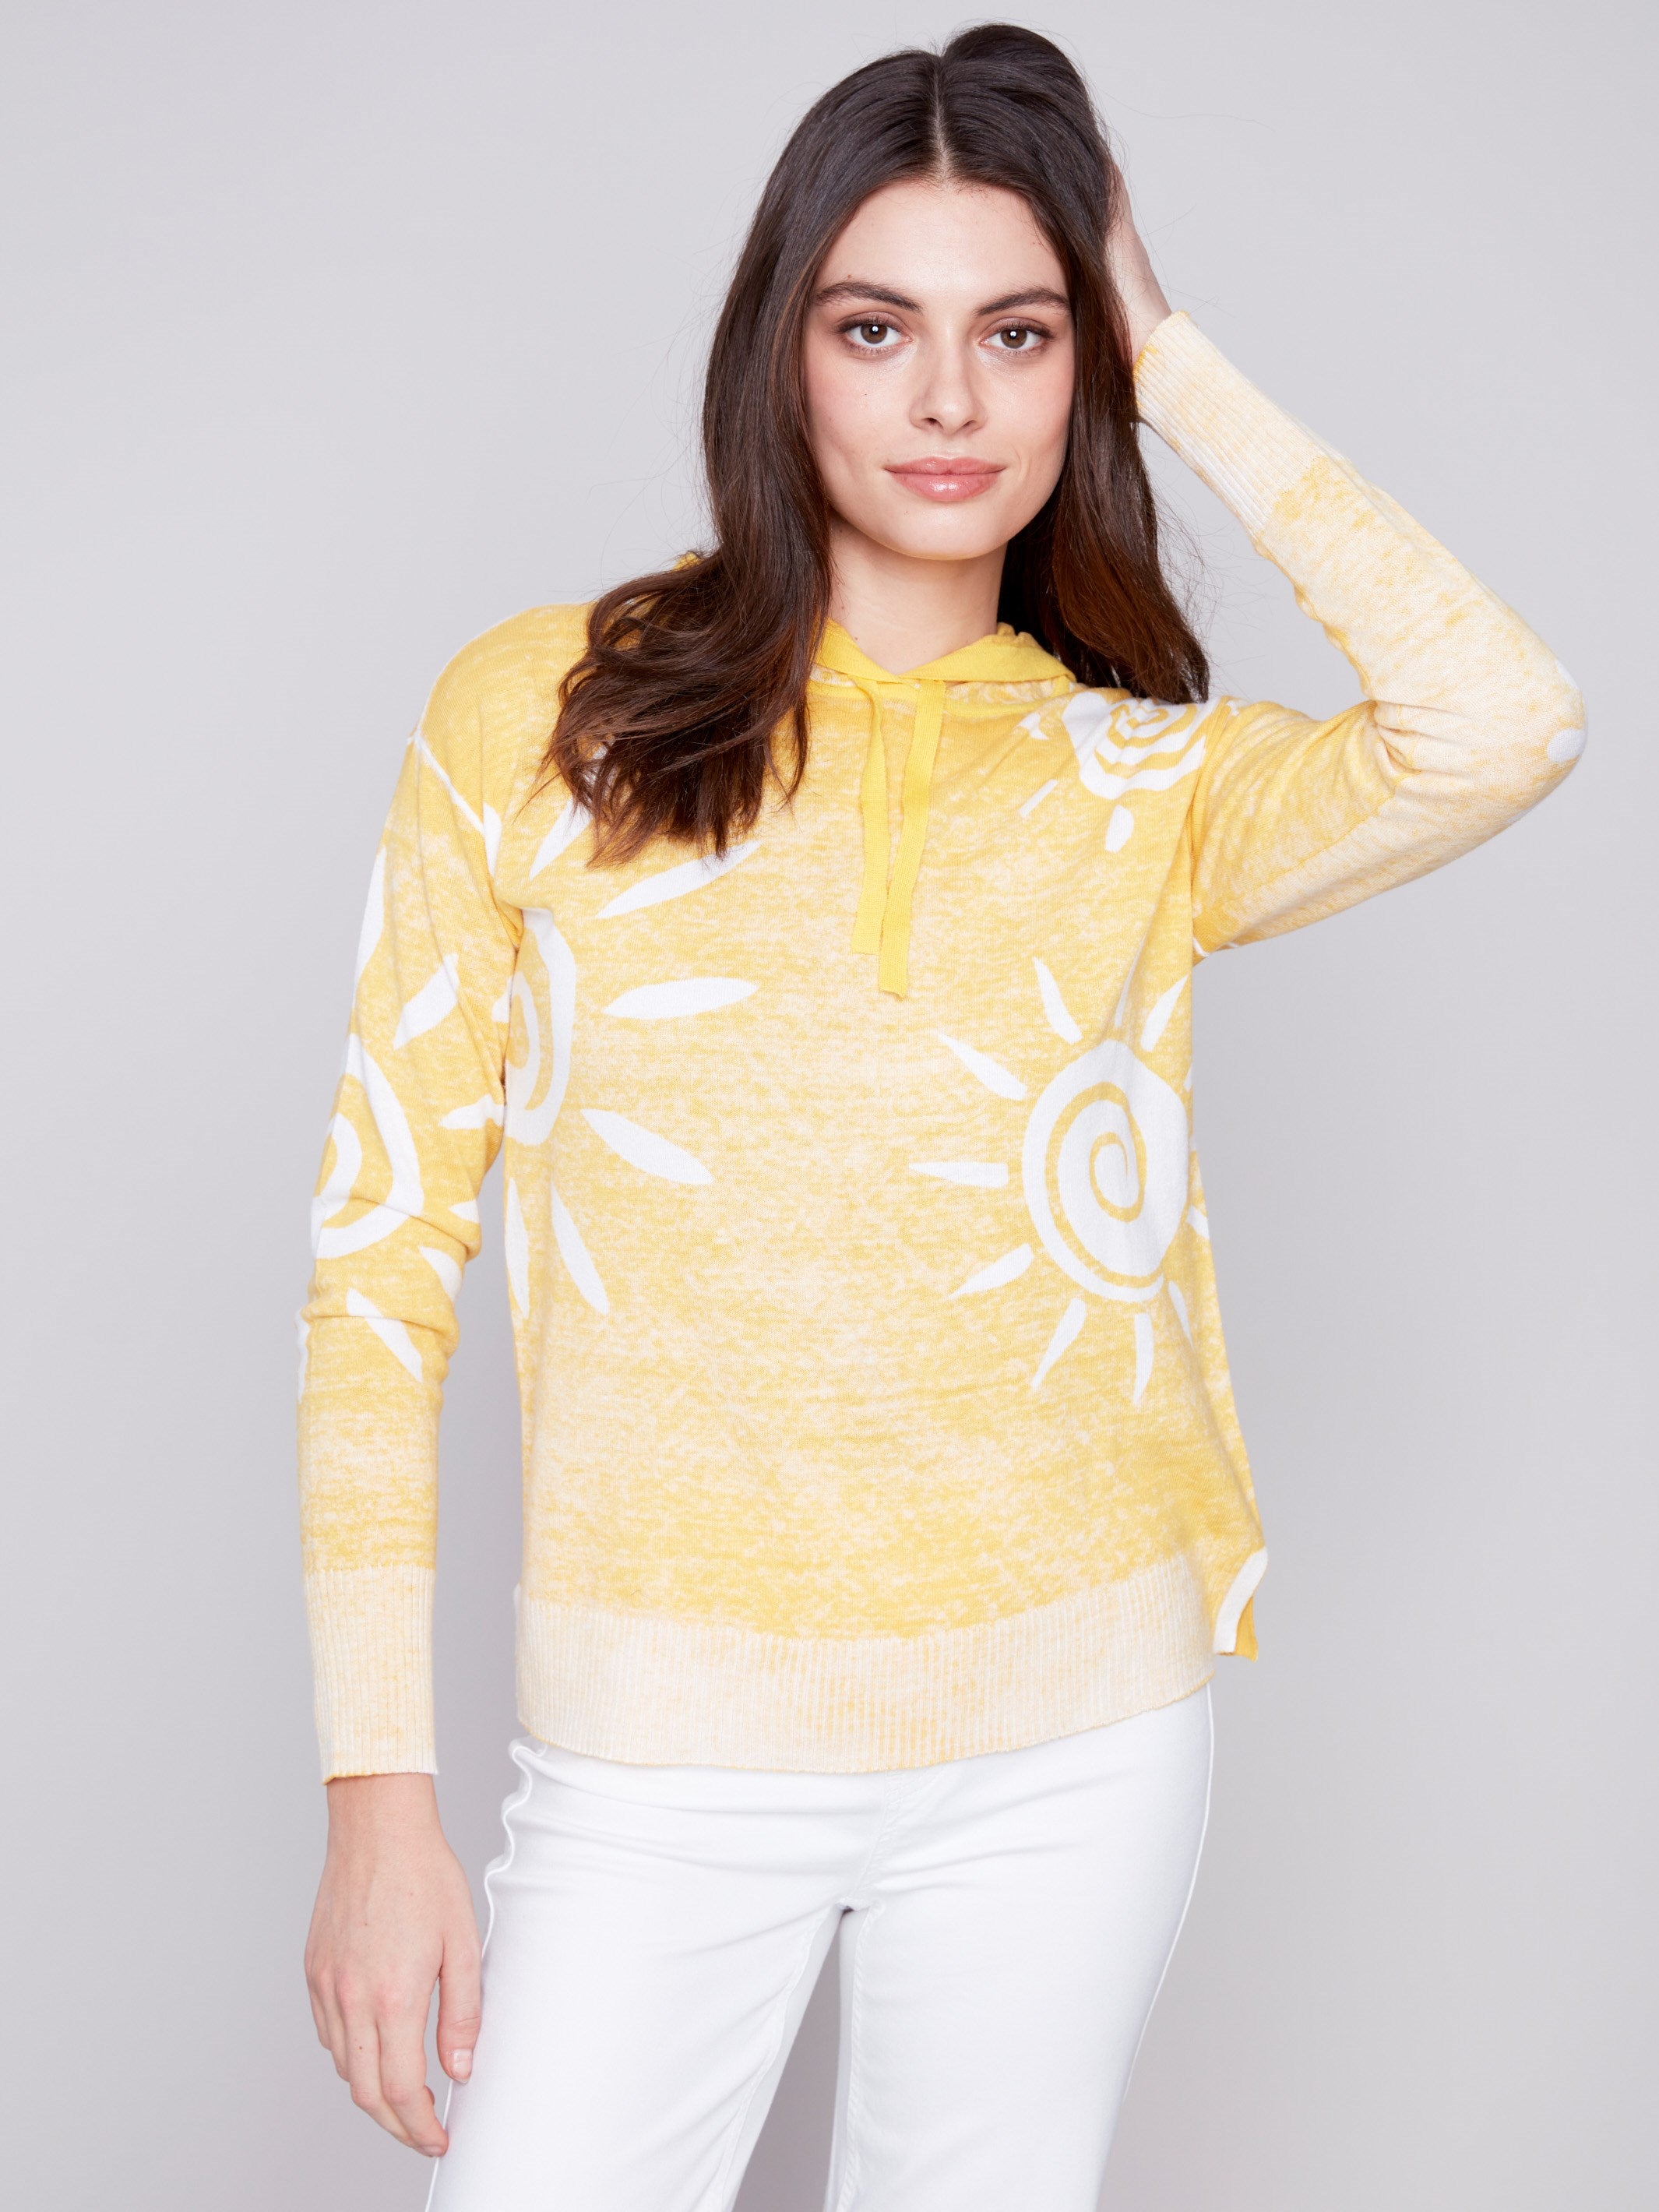 Reverse Printed Hoodie Sweater - Corn - Charlie B Collection Canada - Image 2